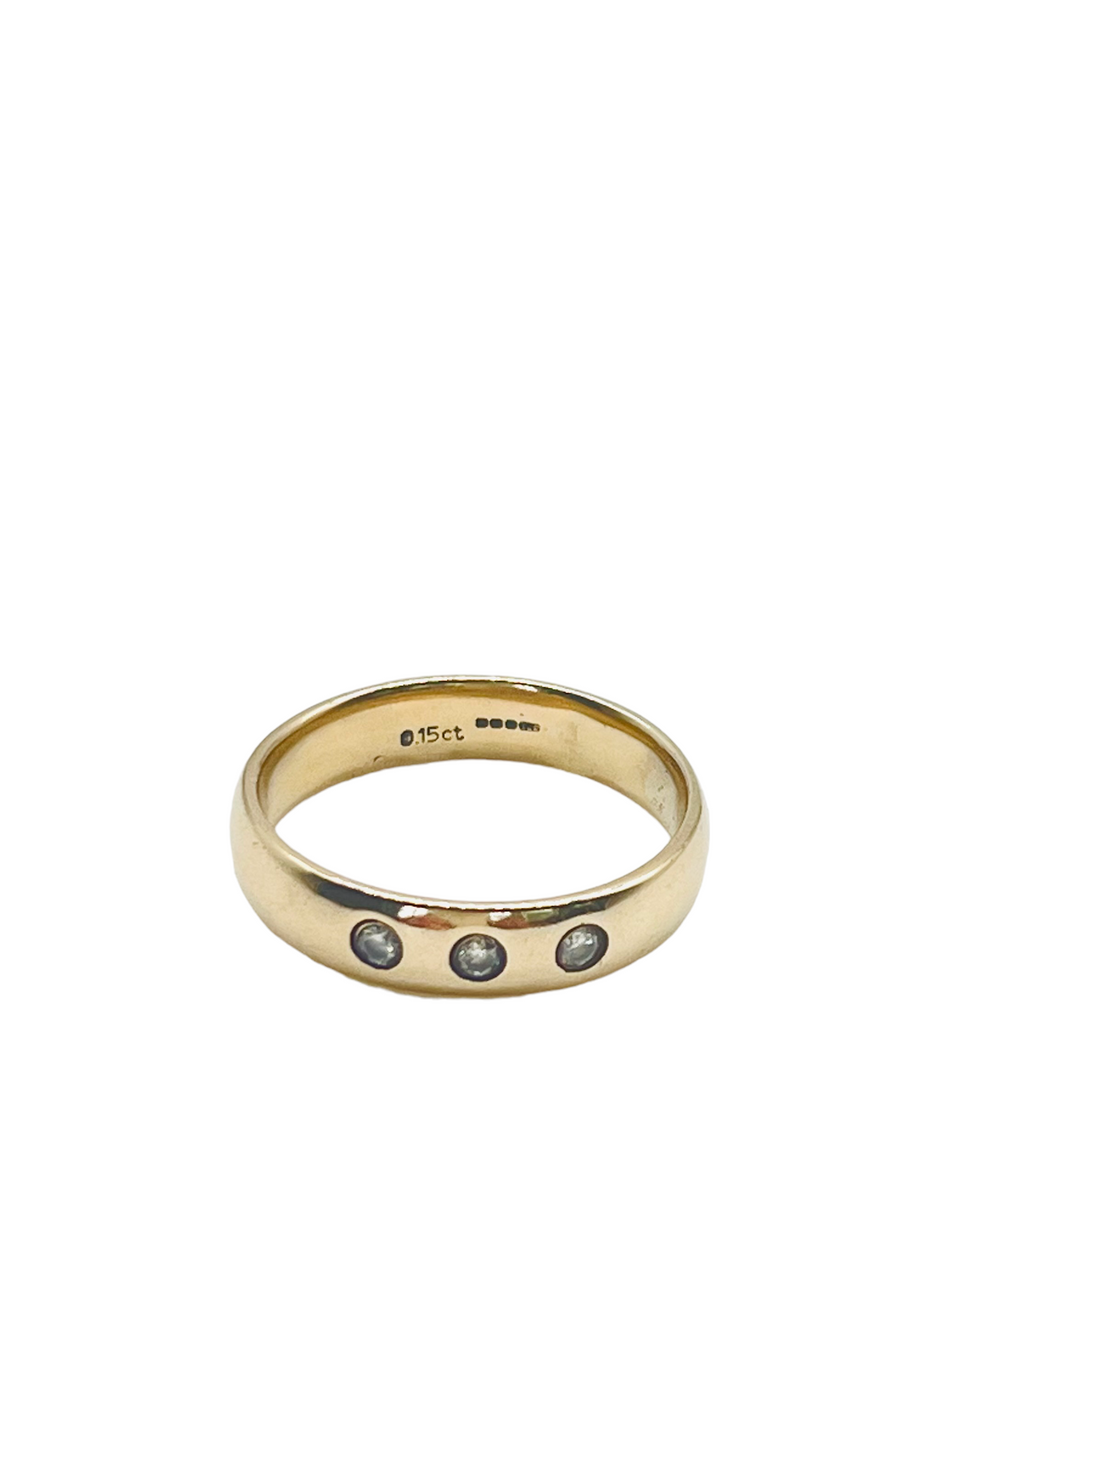 Trilogy Gold Diamond Stacking Ring with a Minimalist Jewelry look.